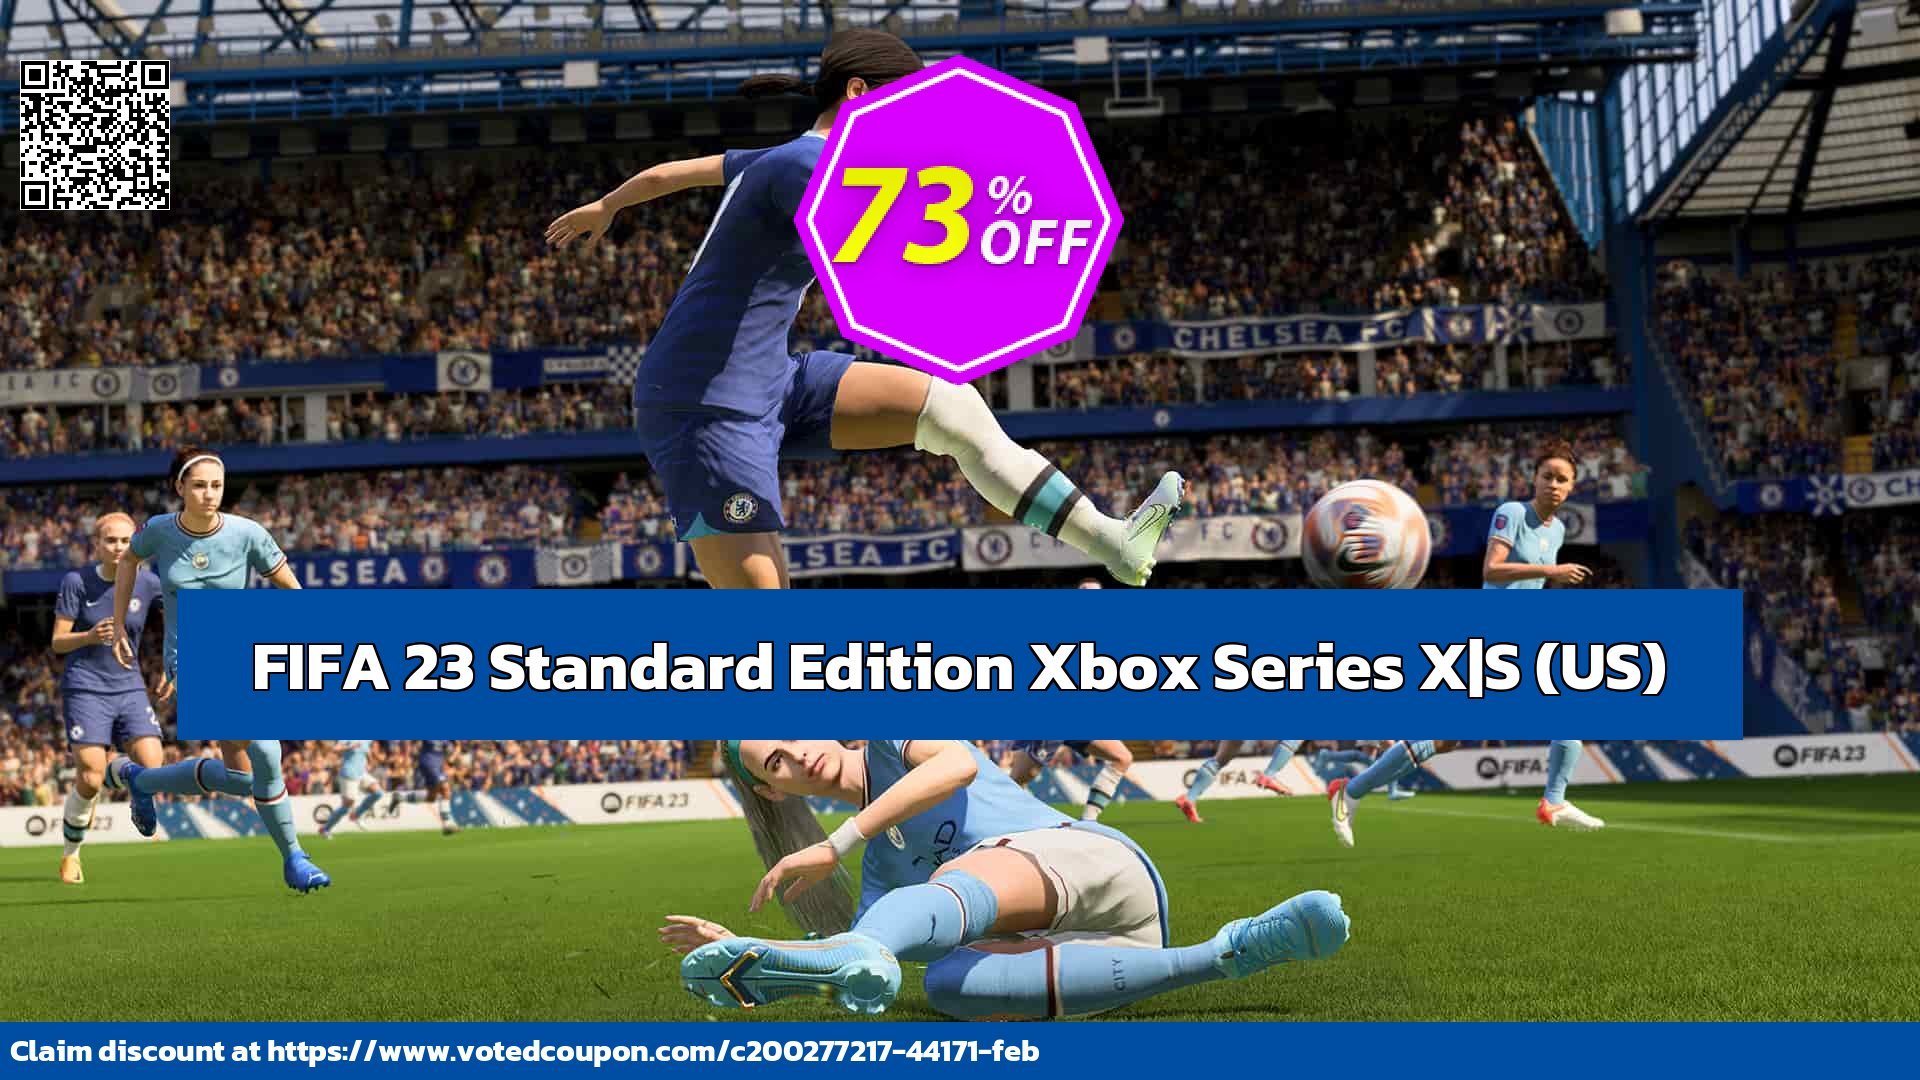 FIFA 23 Standard Edition Xbox Series X|S, US  voted-on promotion codes